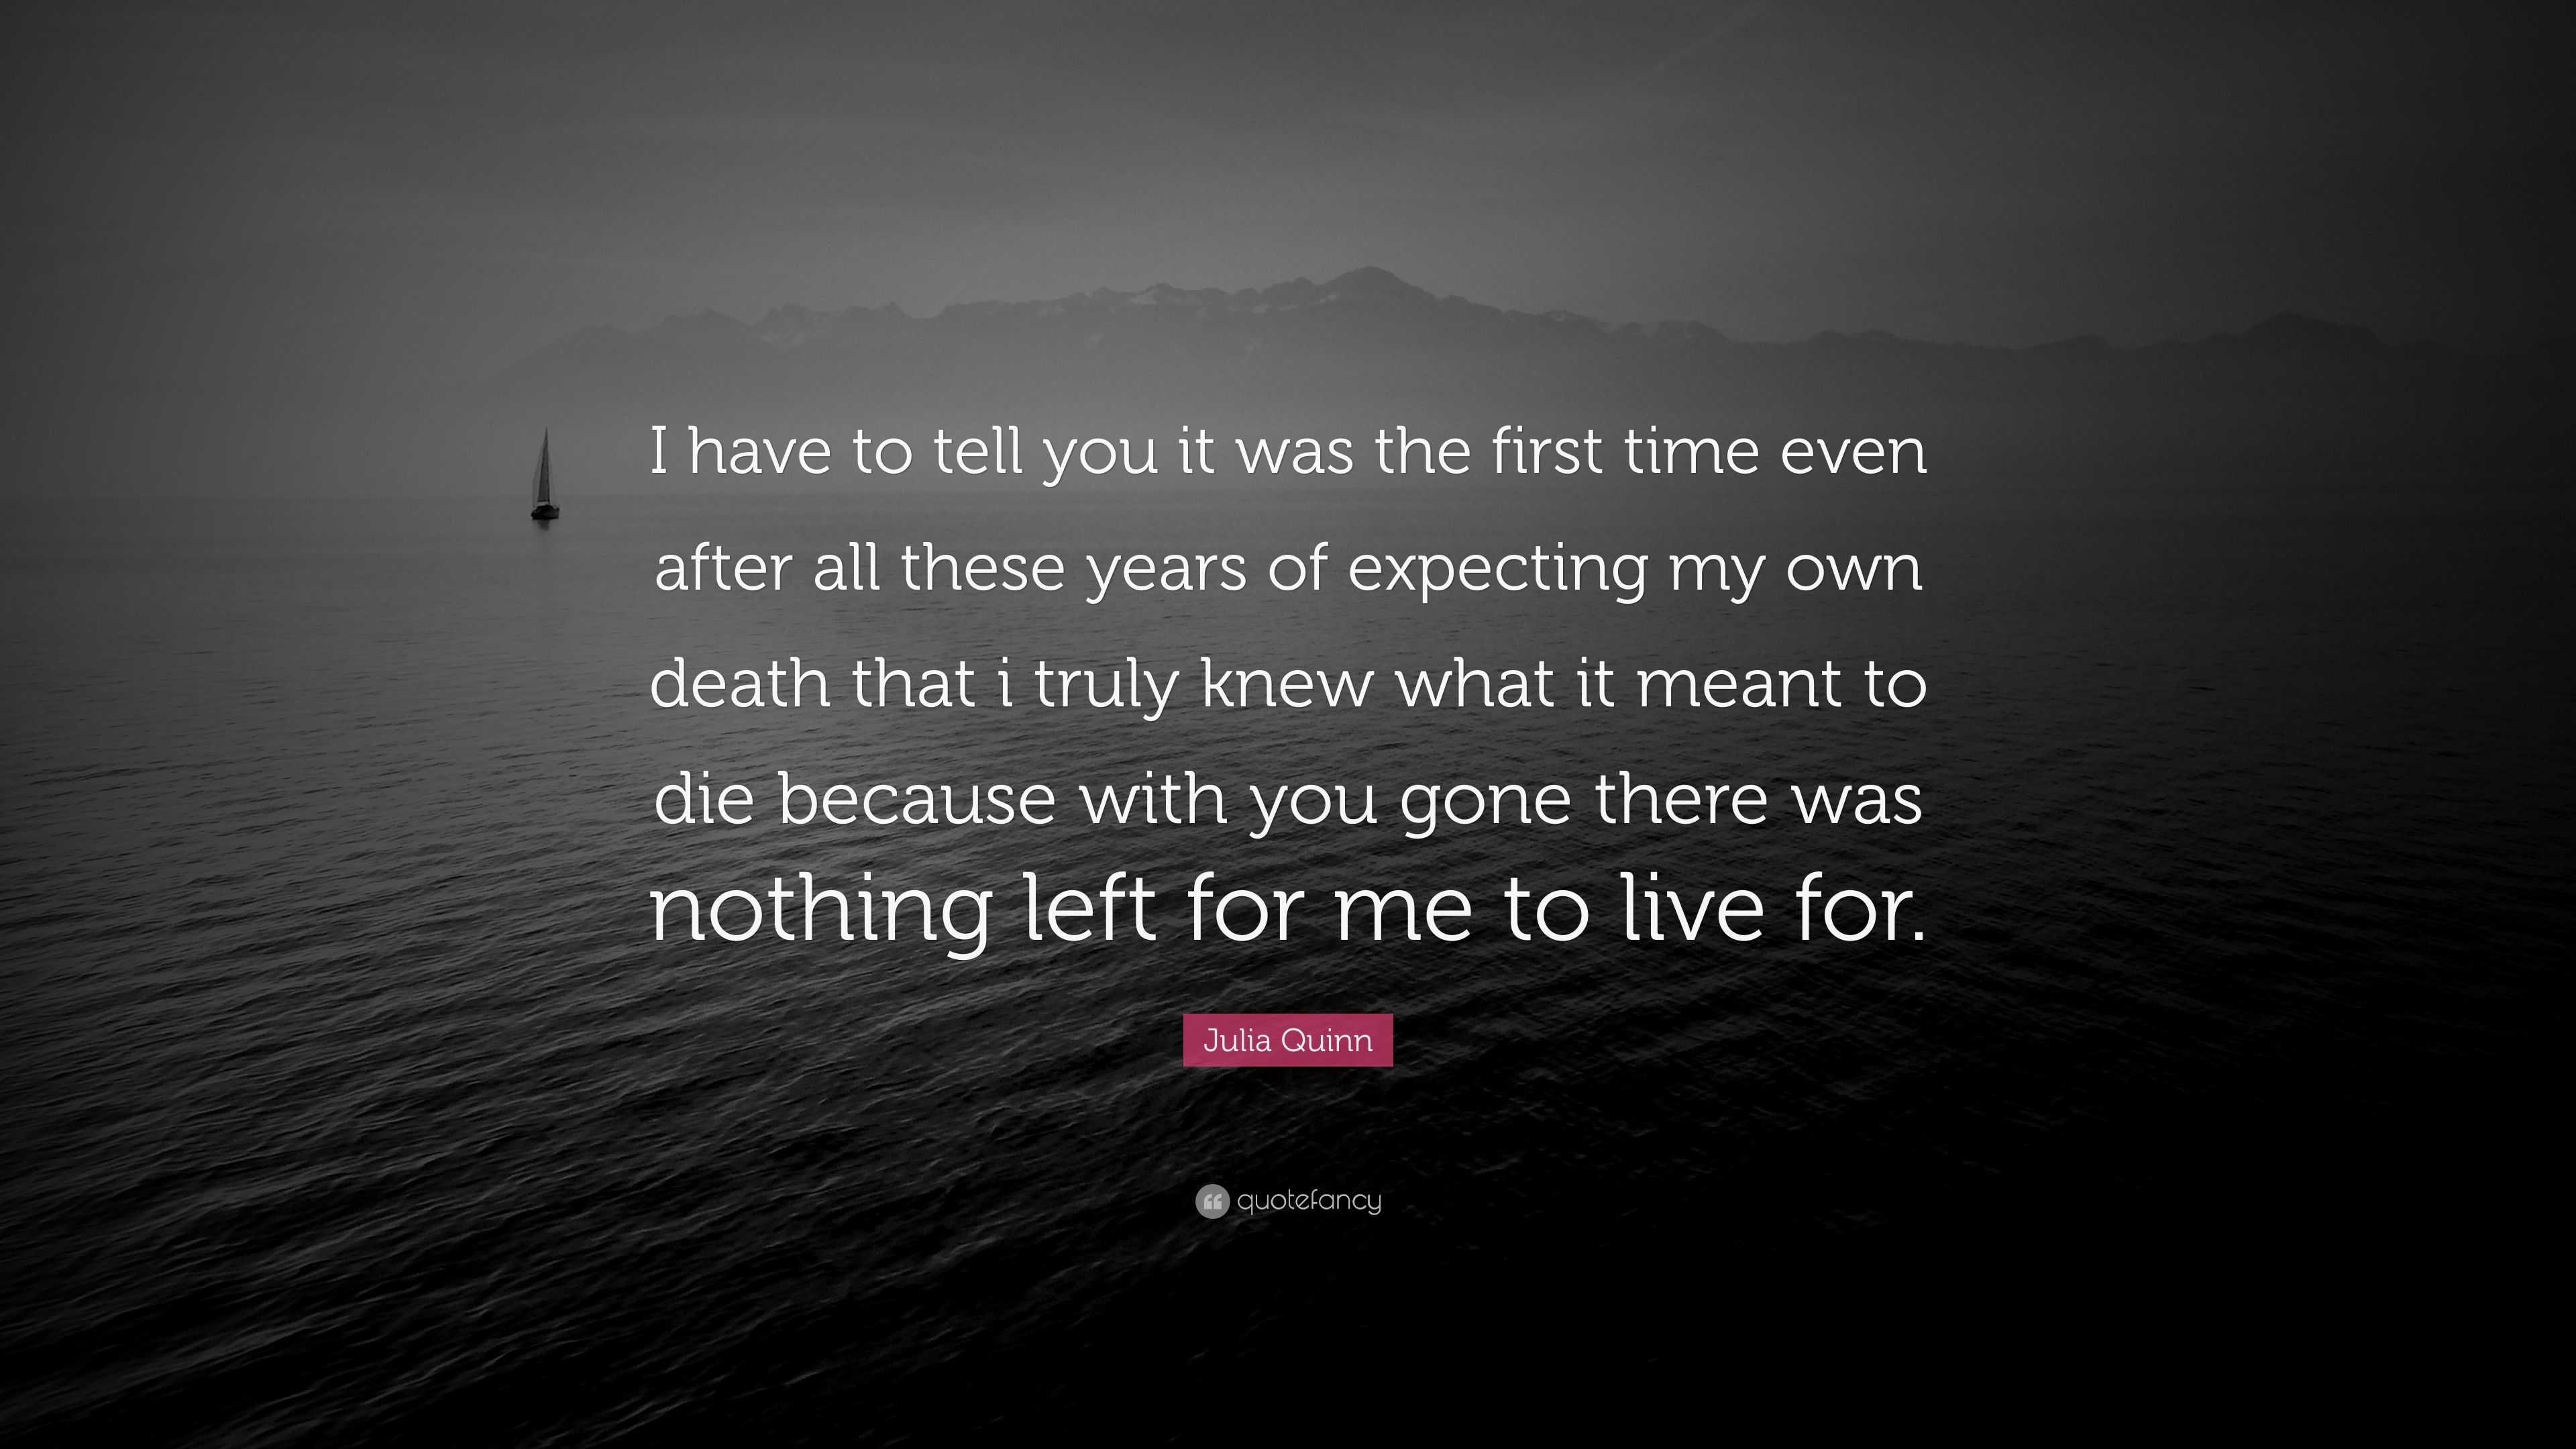 Julia Quinn Quote I Have To Tell You It Was The First Time Even After All These Years Of Expecting My Own Death That I Truly Knew What It